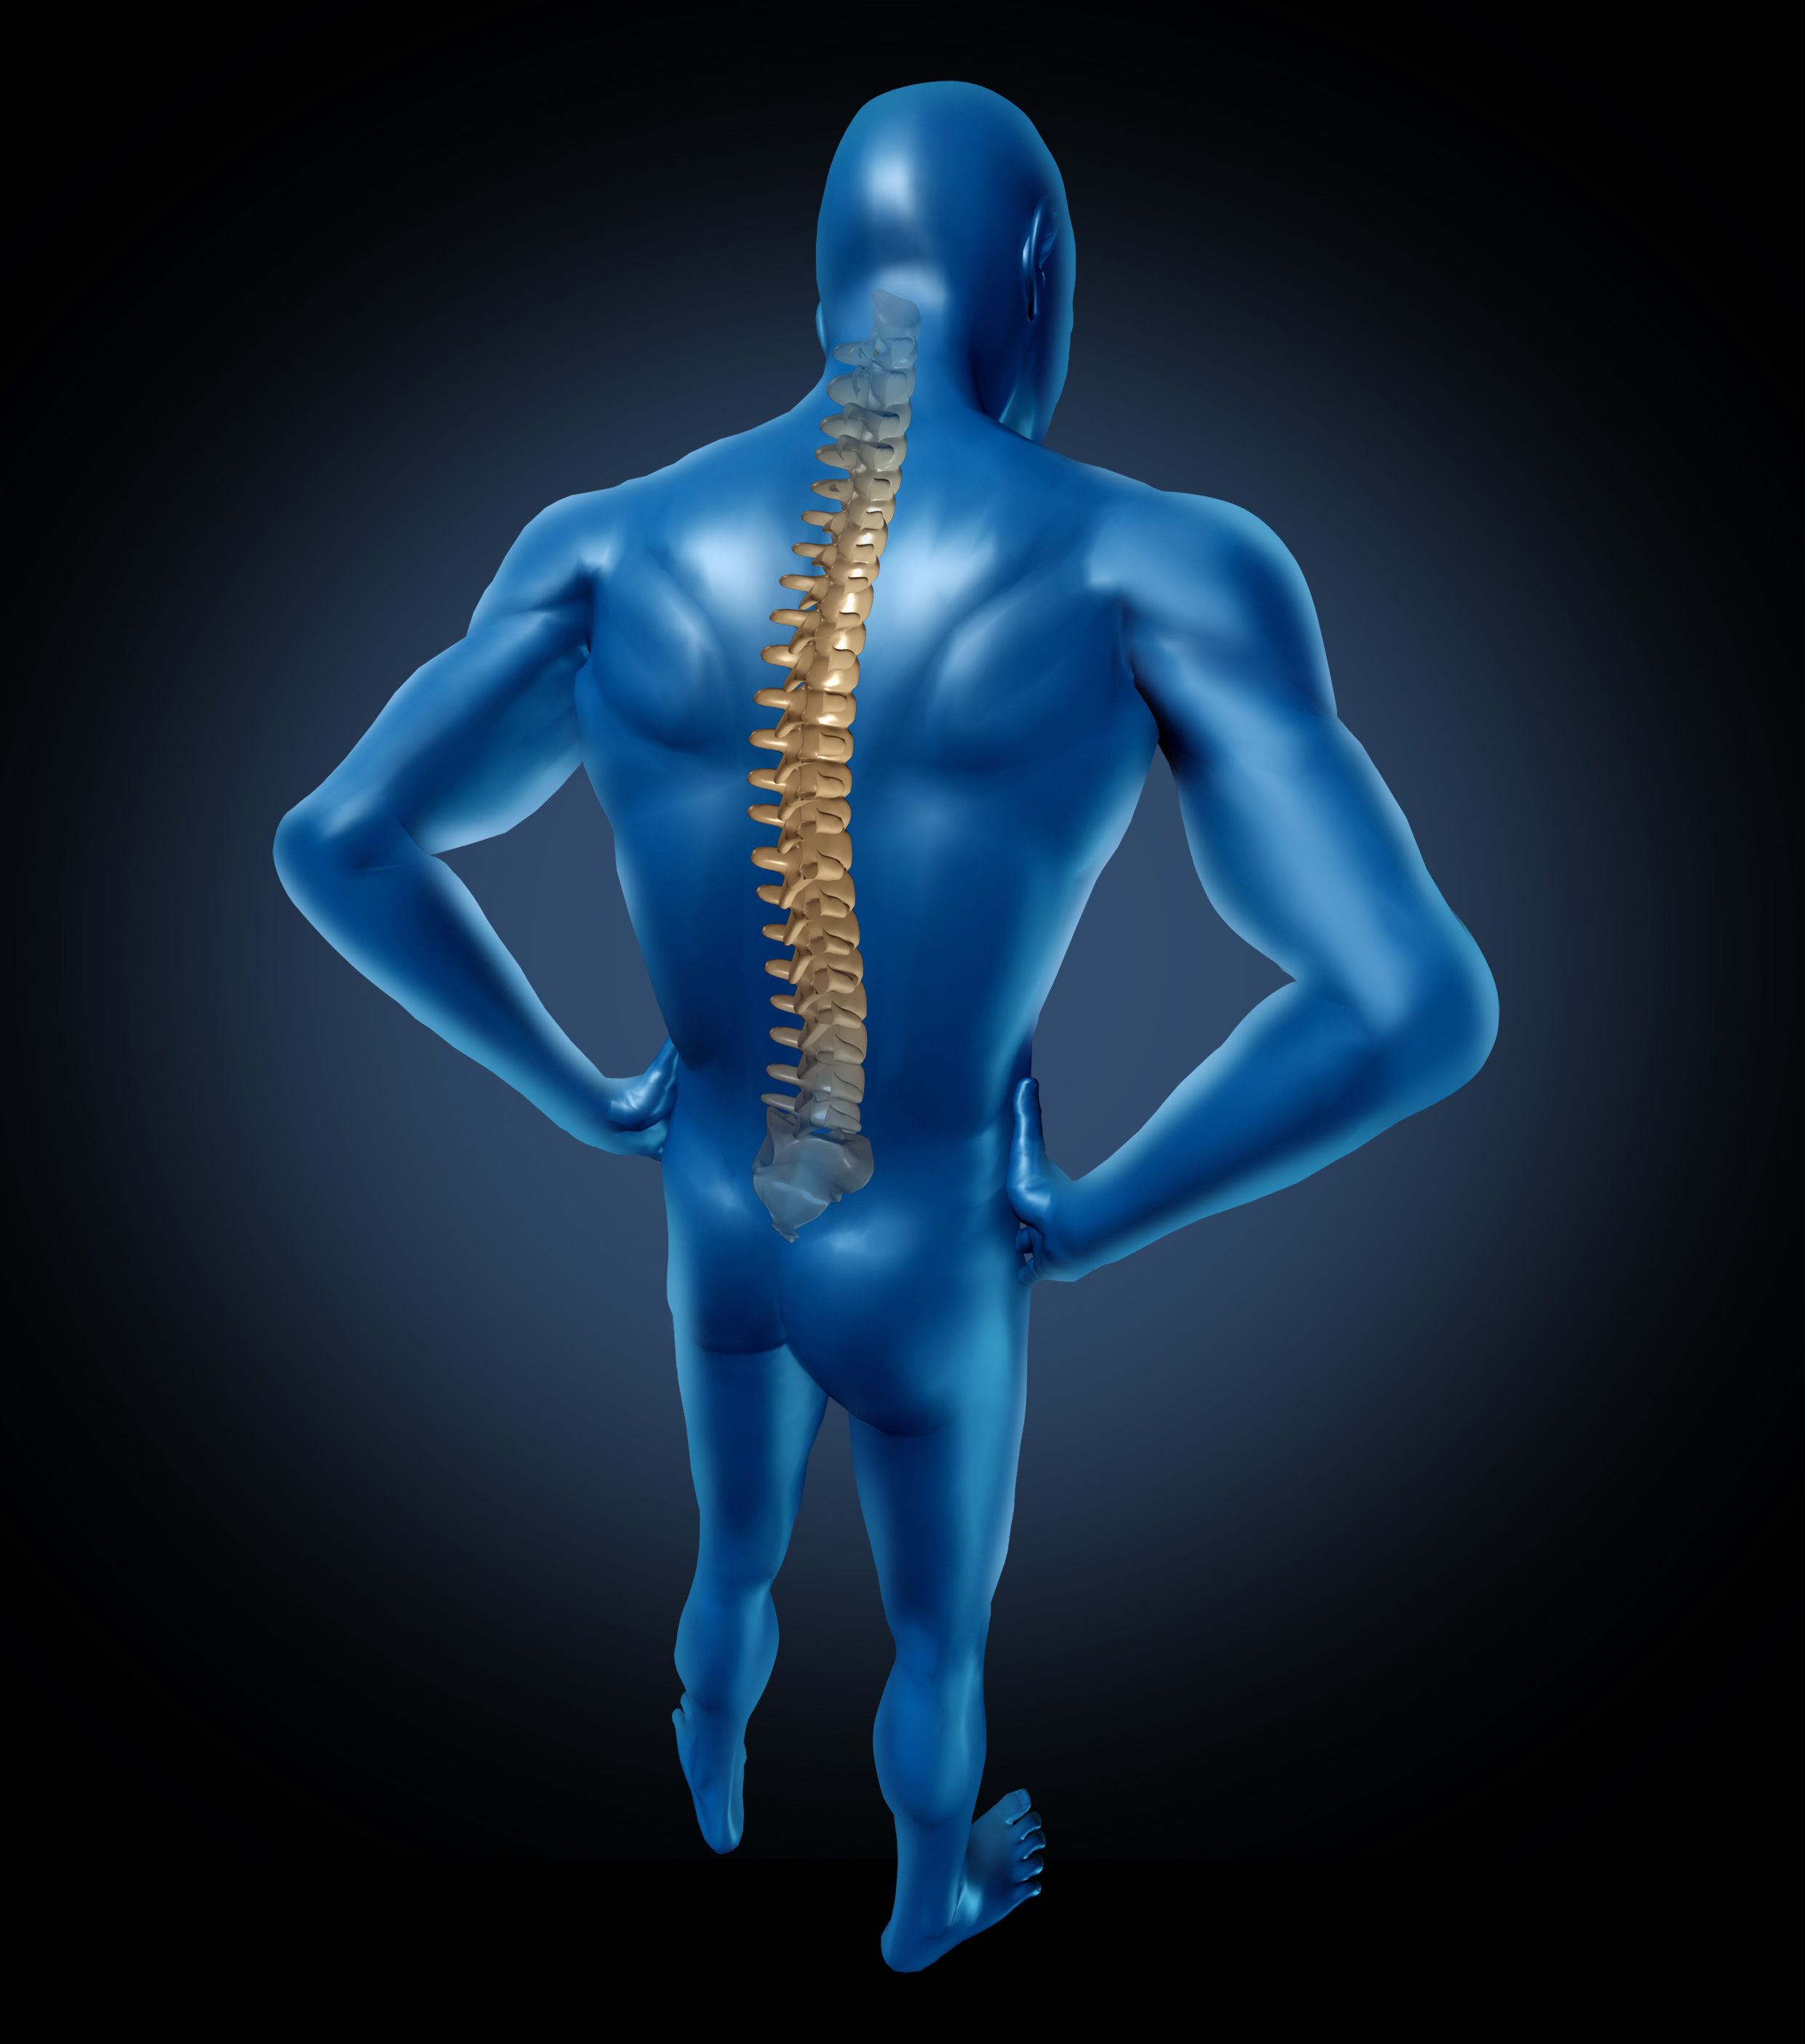 Chiropractic Care Can Keep the Pain Away